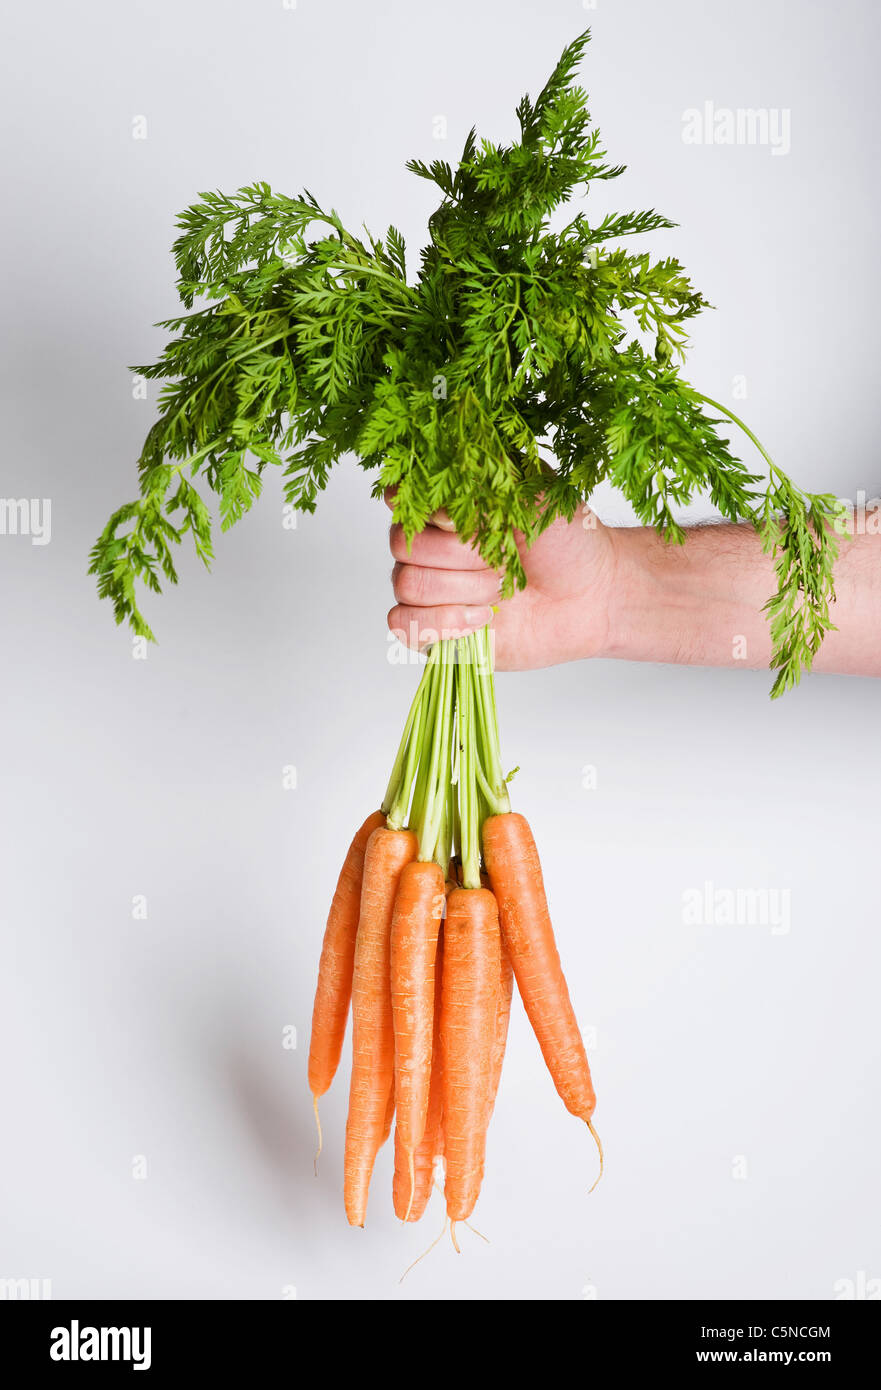 A man holding a bunch of carrots Stock Photo